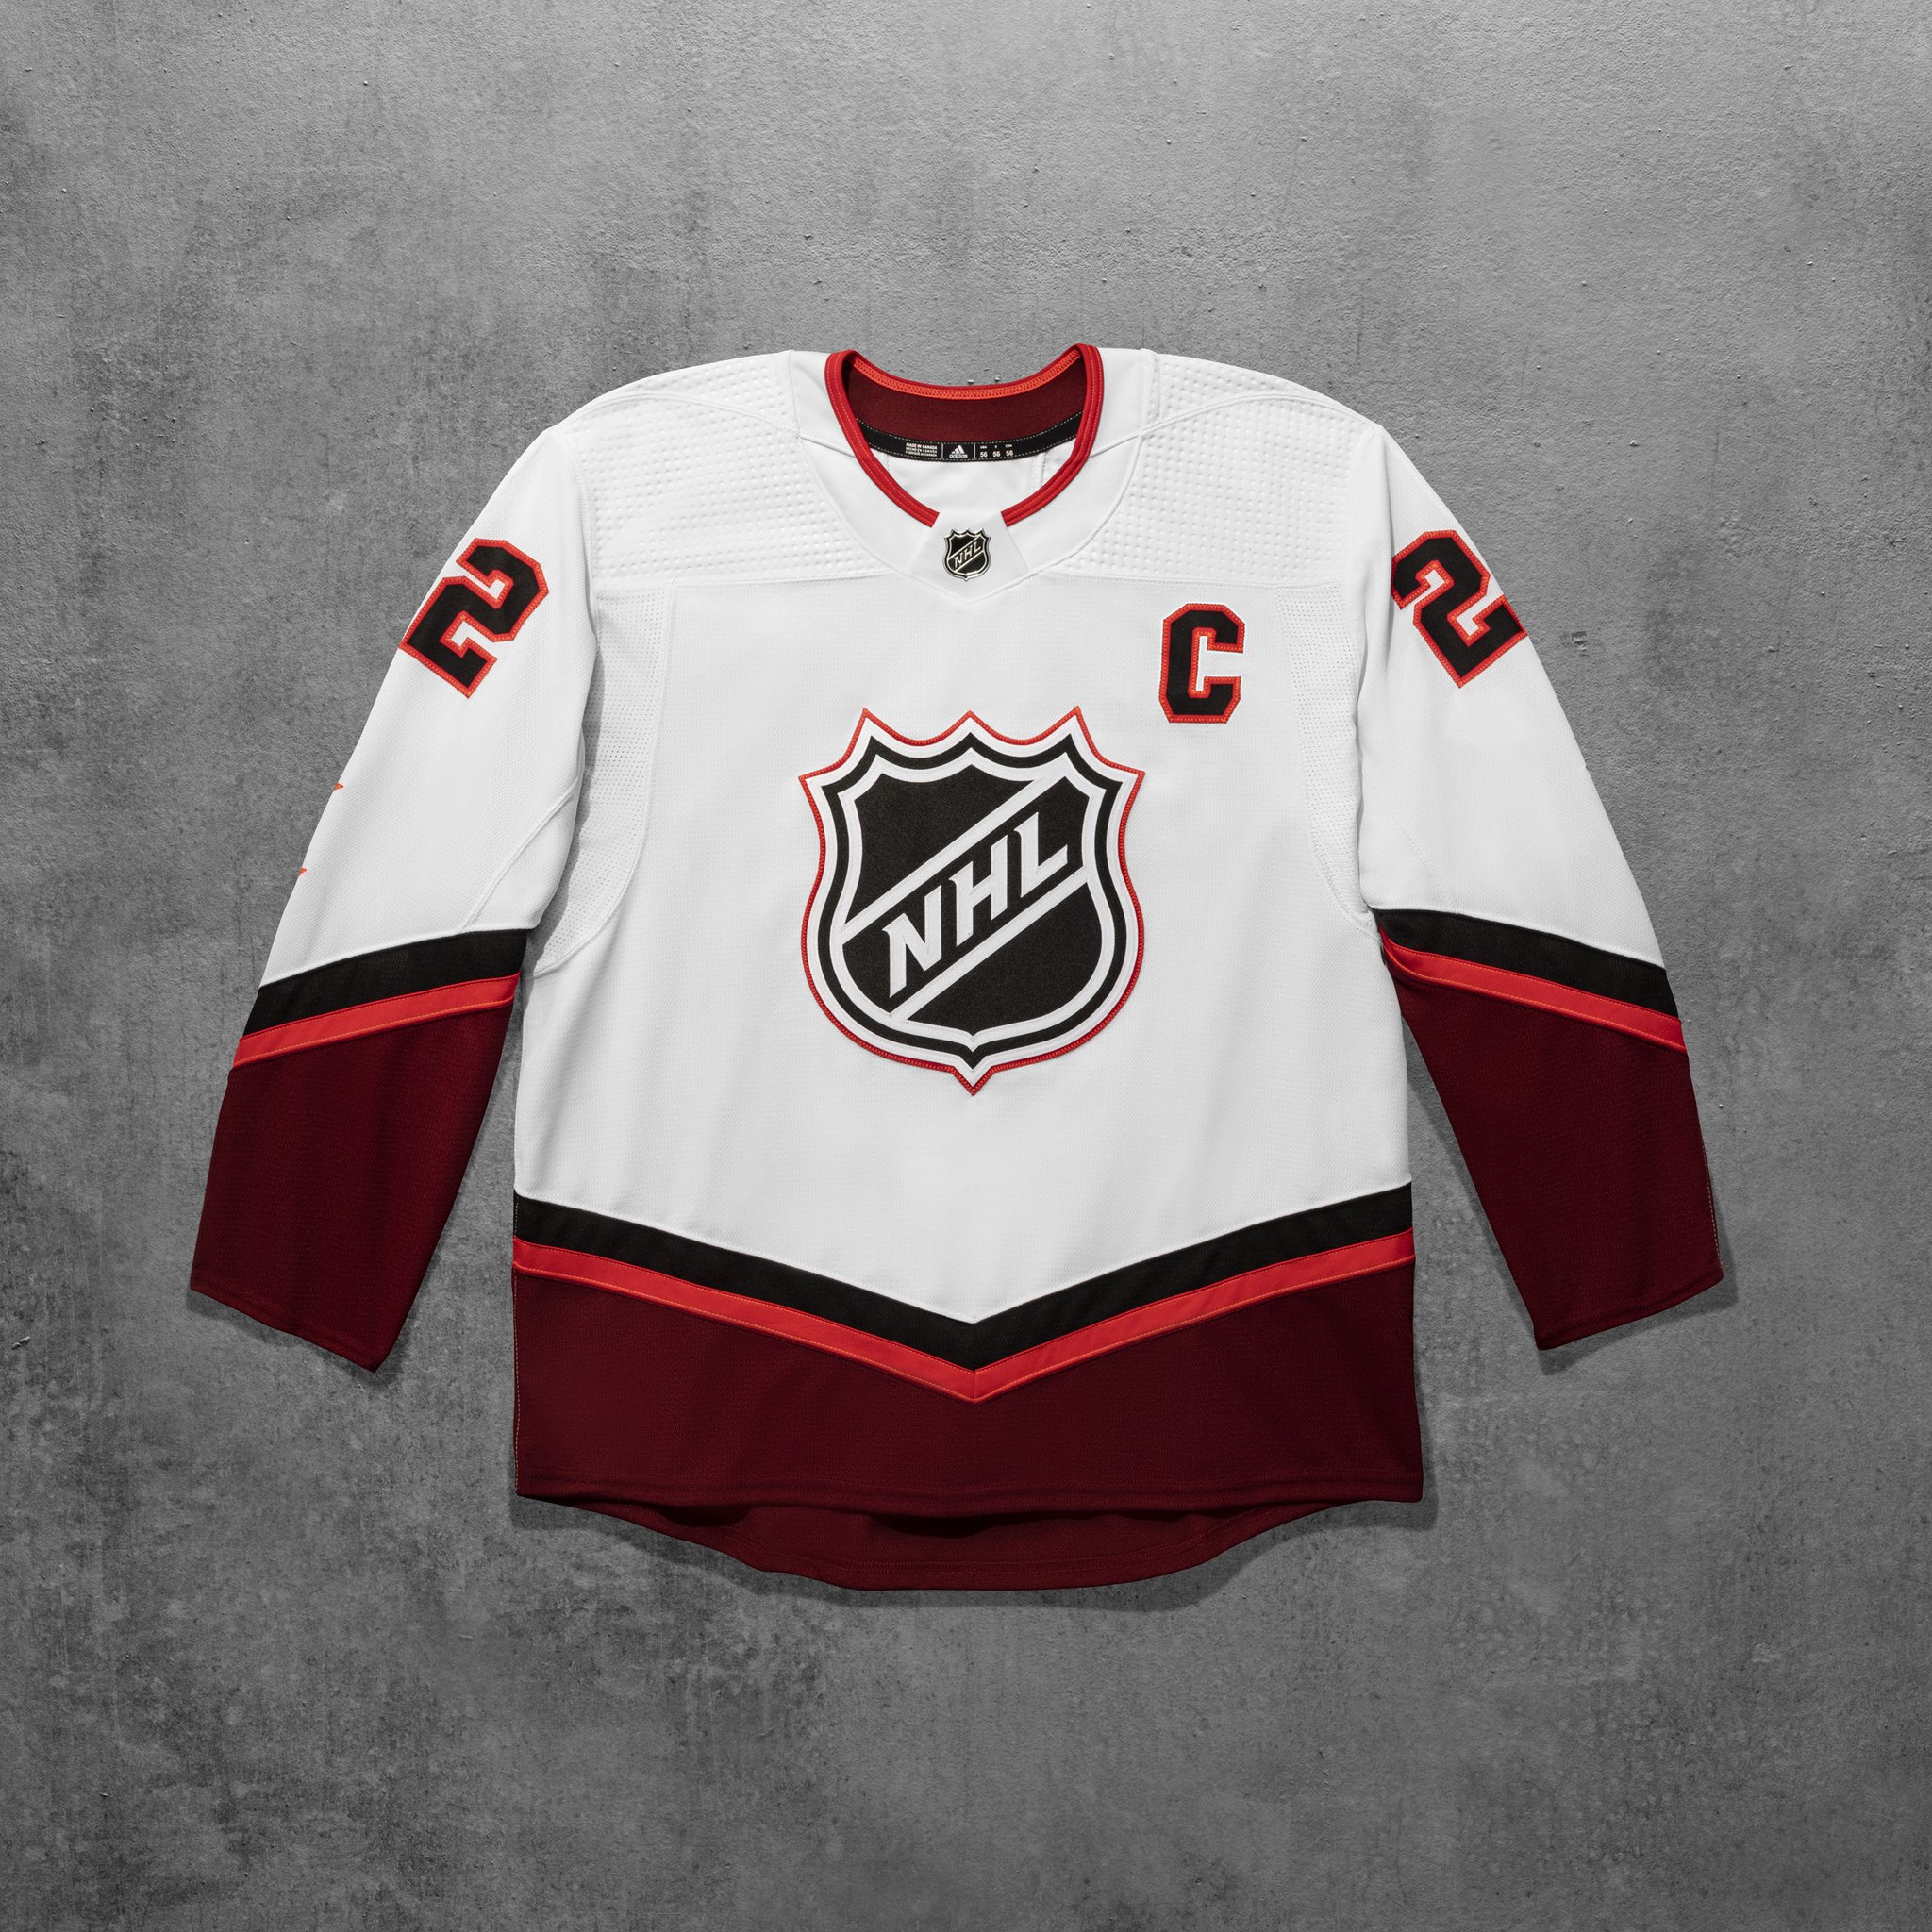 NHL 2020 All-Star jerseys revealed: Twitter quickly pans sweaters for Jan.  25 games in St. Louis 